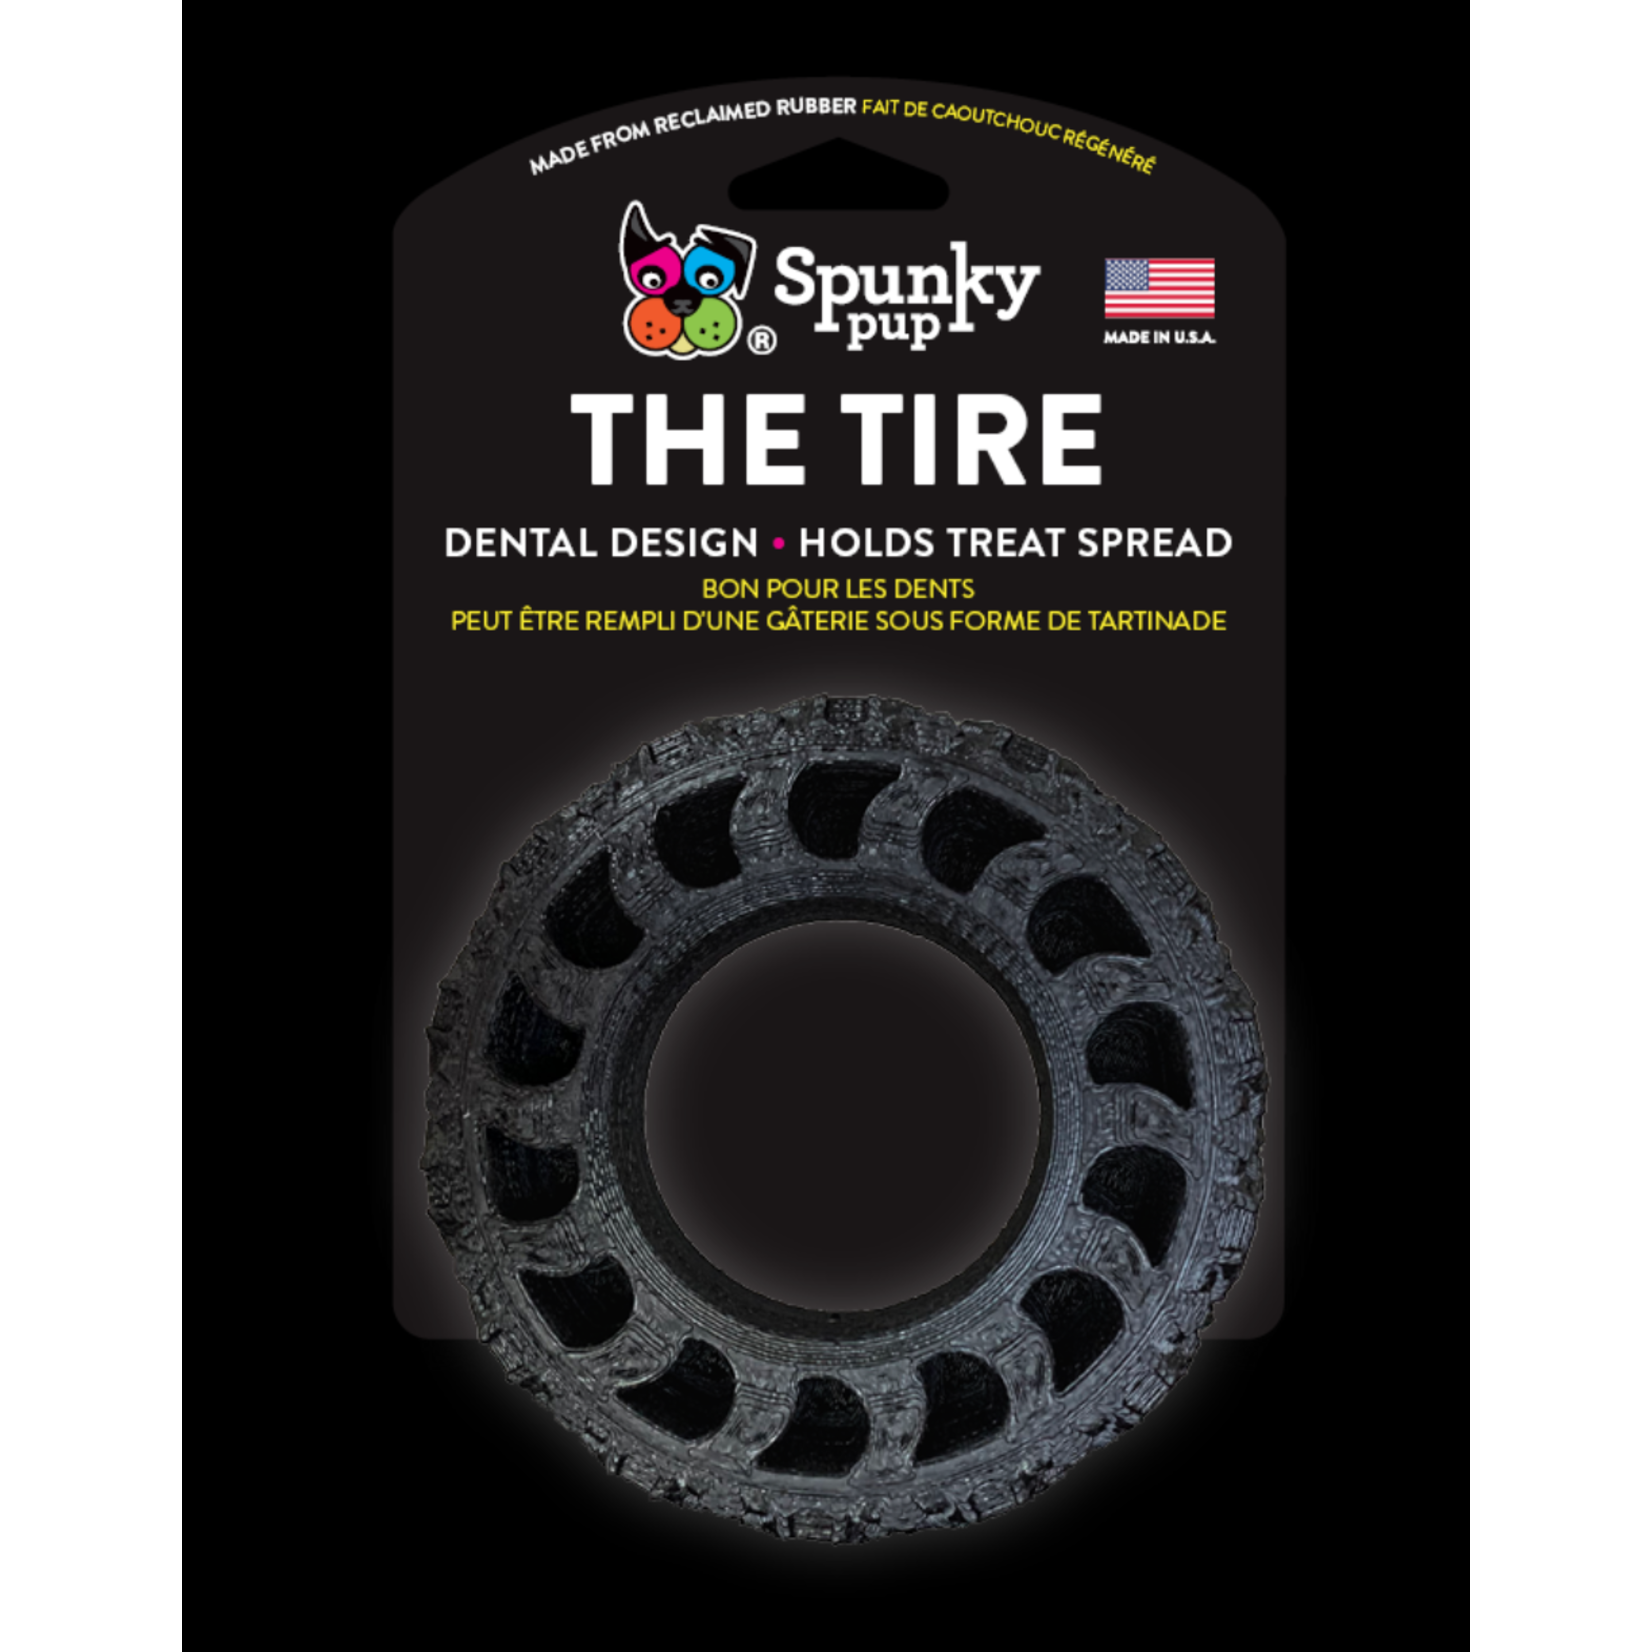 Spunky Pup Spunky Pup The Tire - Reclaimed Rubber Toy - MADE IN THE USA | Small